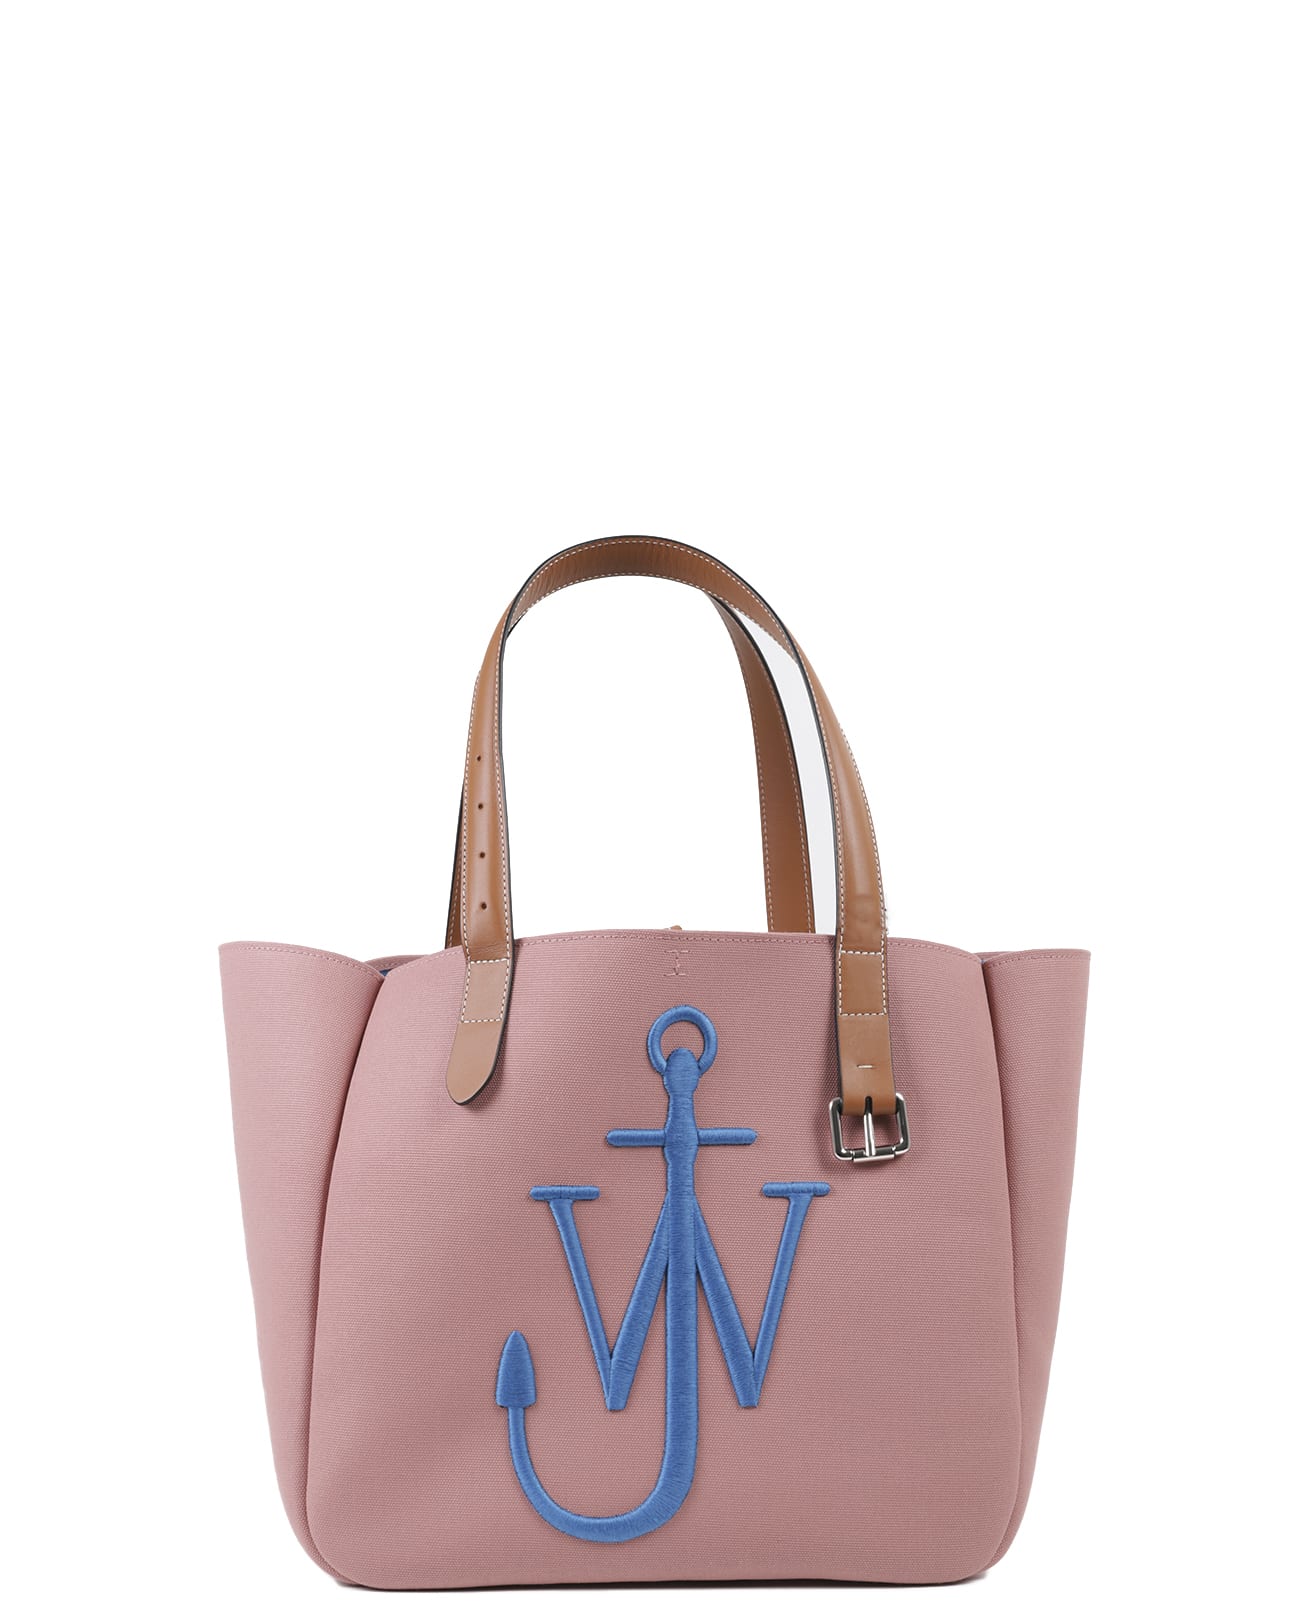 JW ANDERSON Canvases JW ANDERSON PINK BELT TOTE